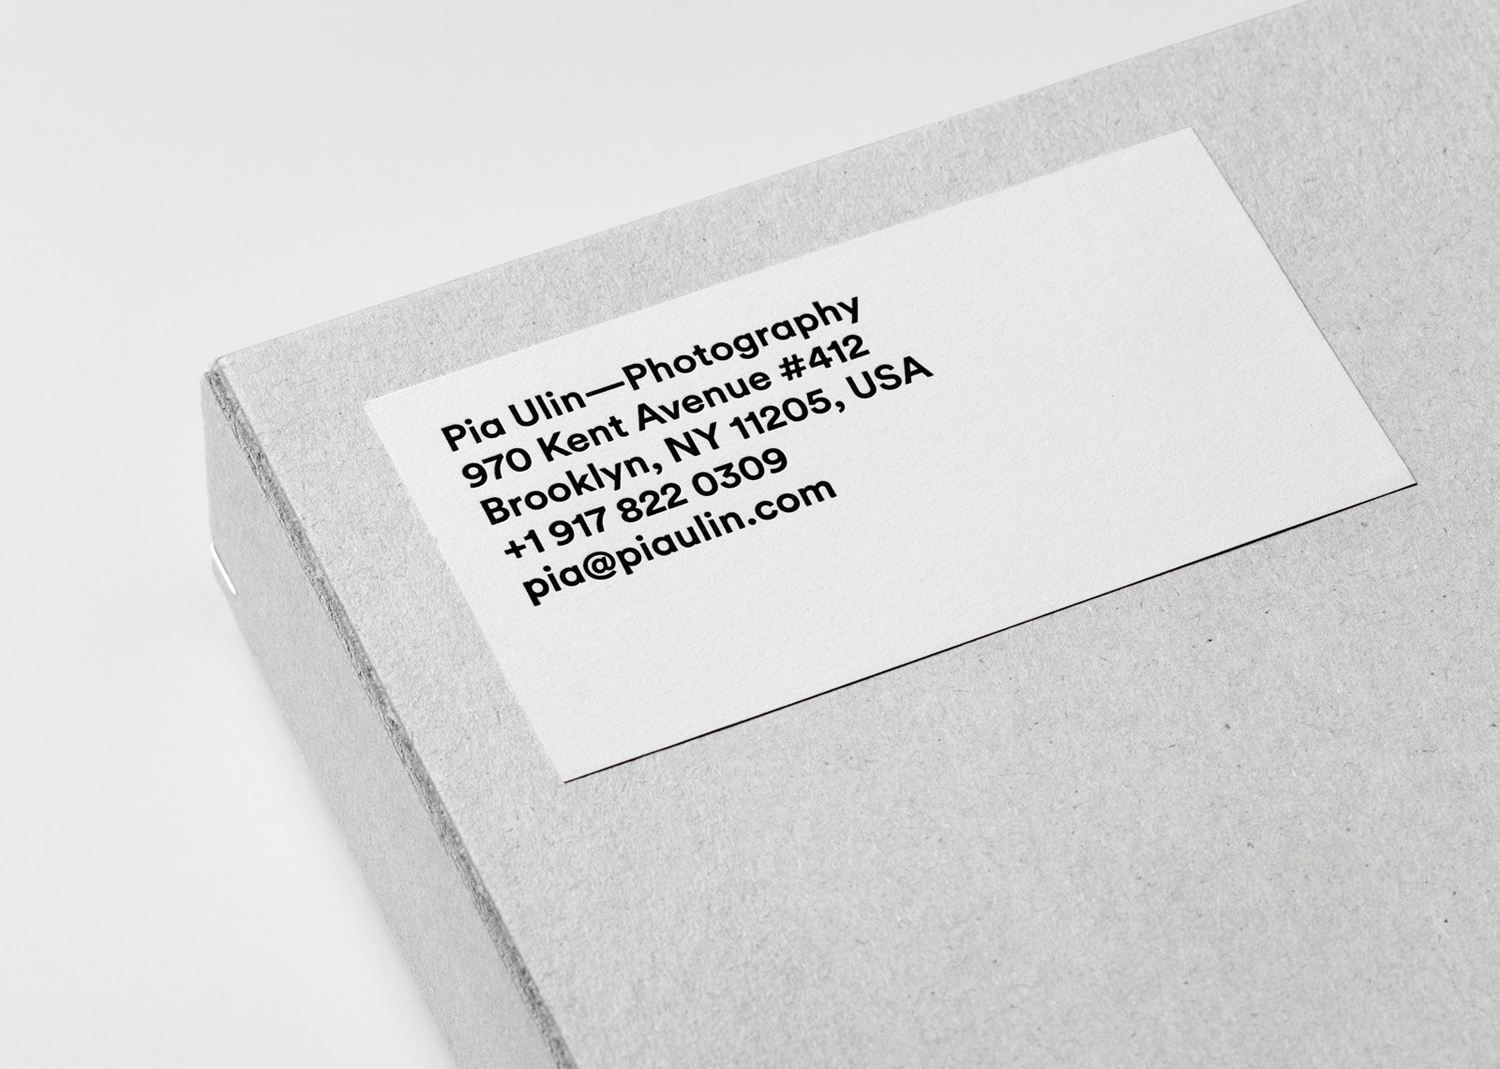 Branding for Pia Ulin Photography by The Studio, Sweden